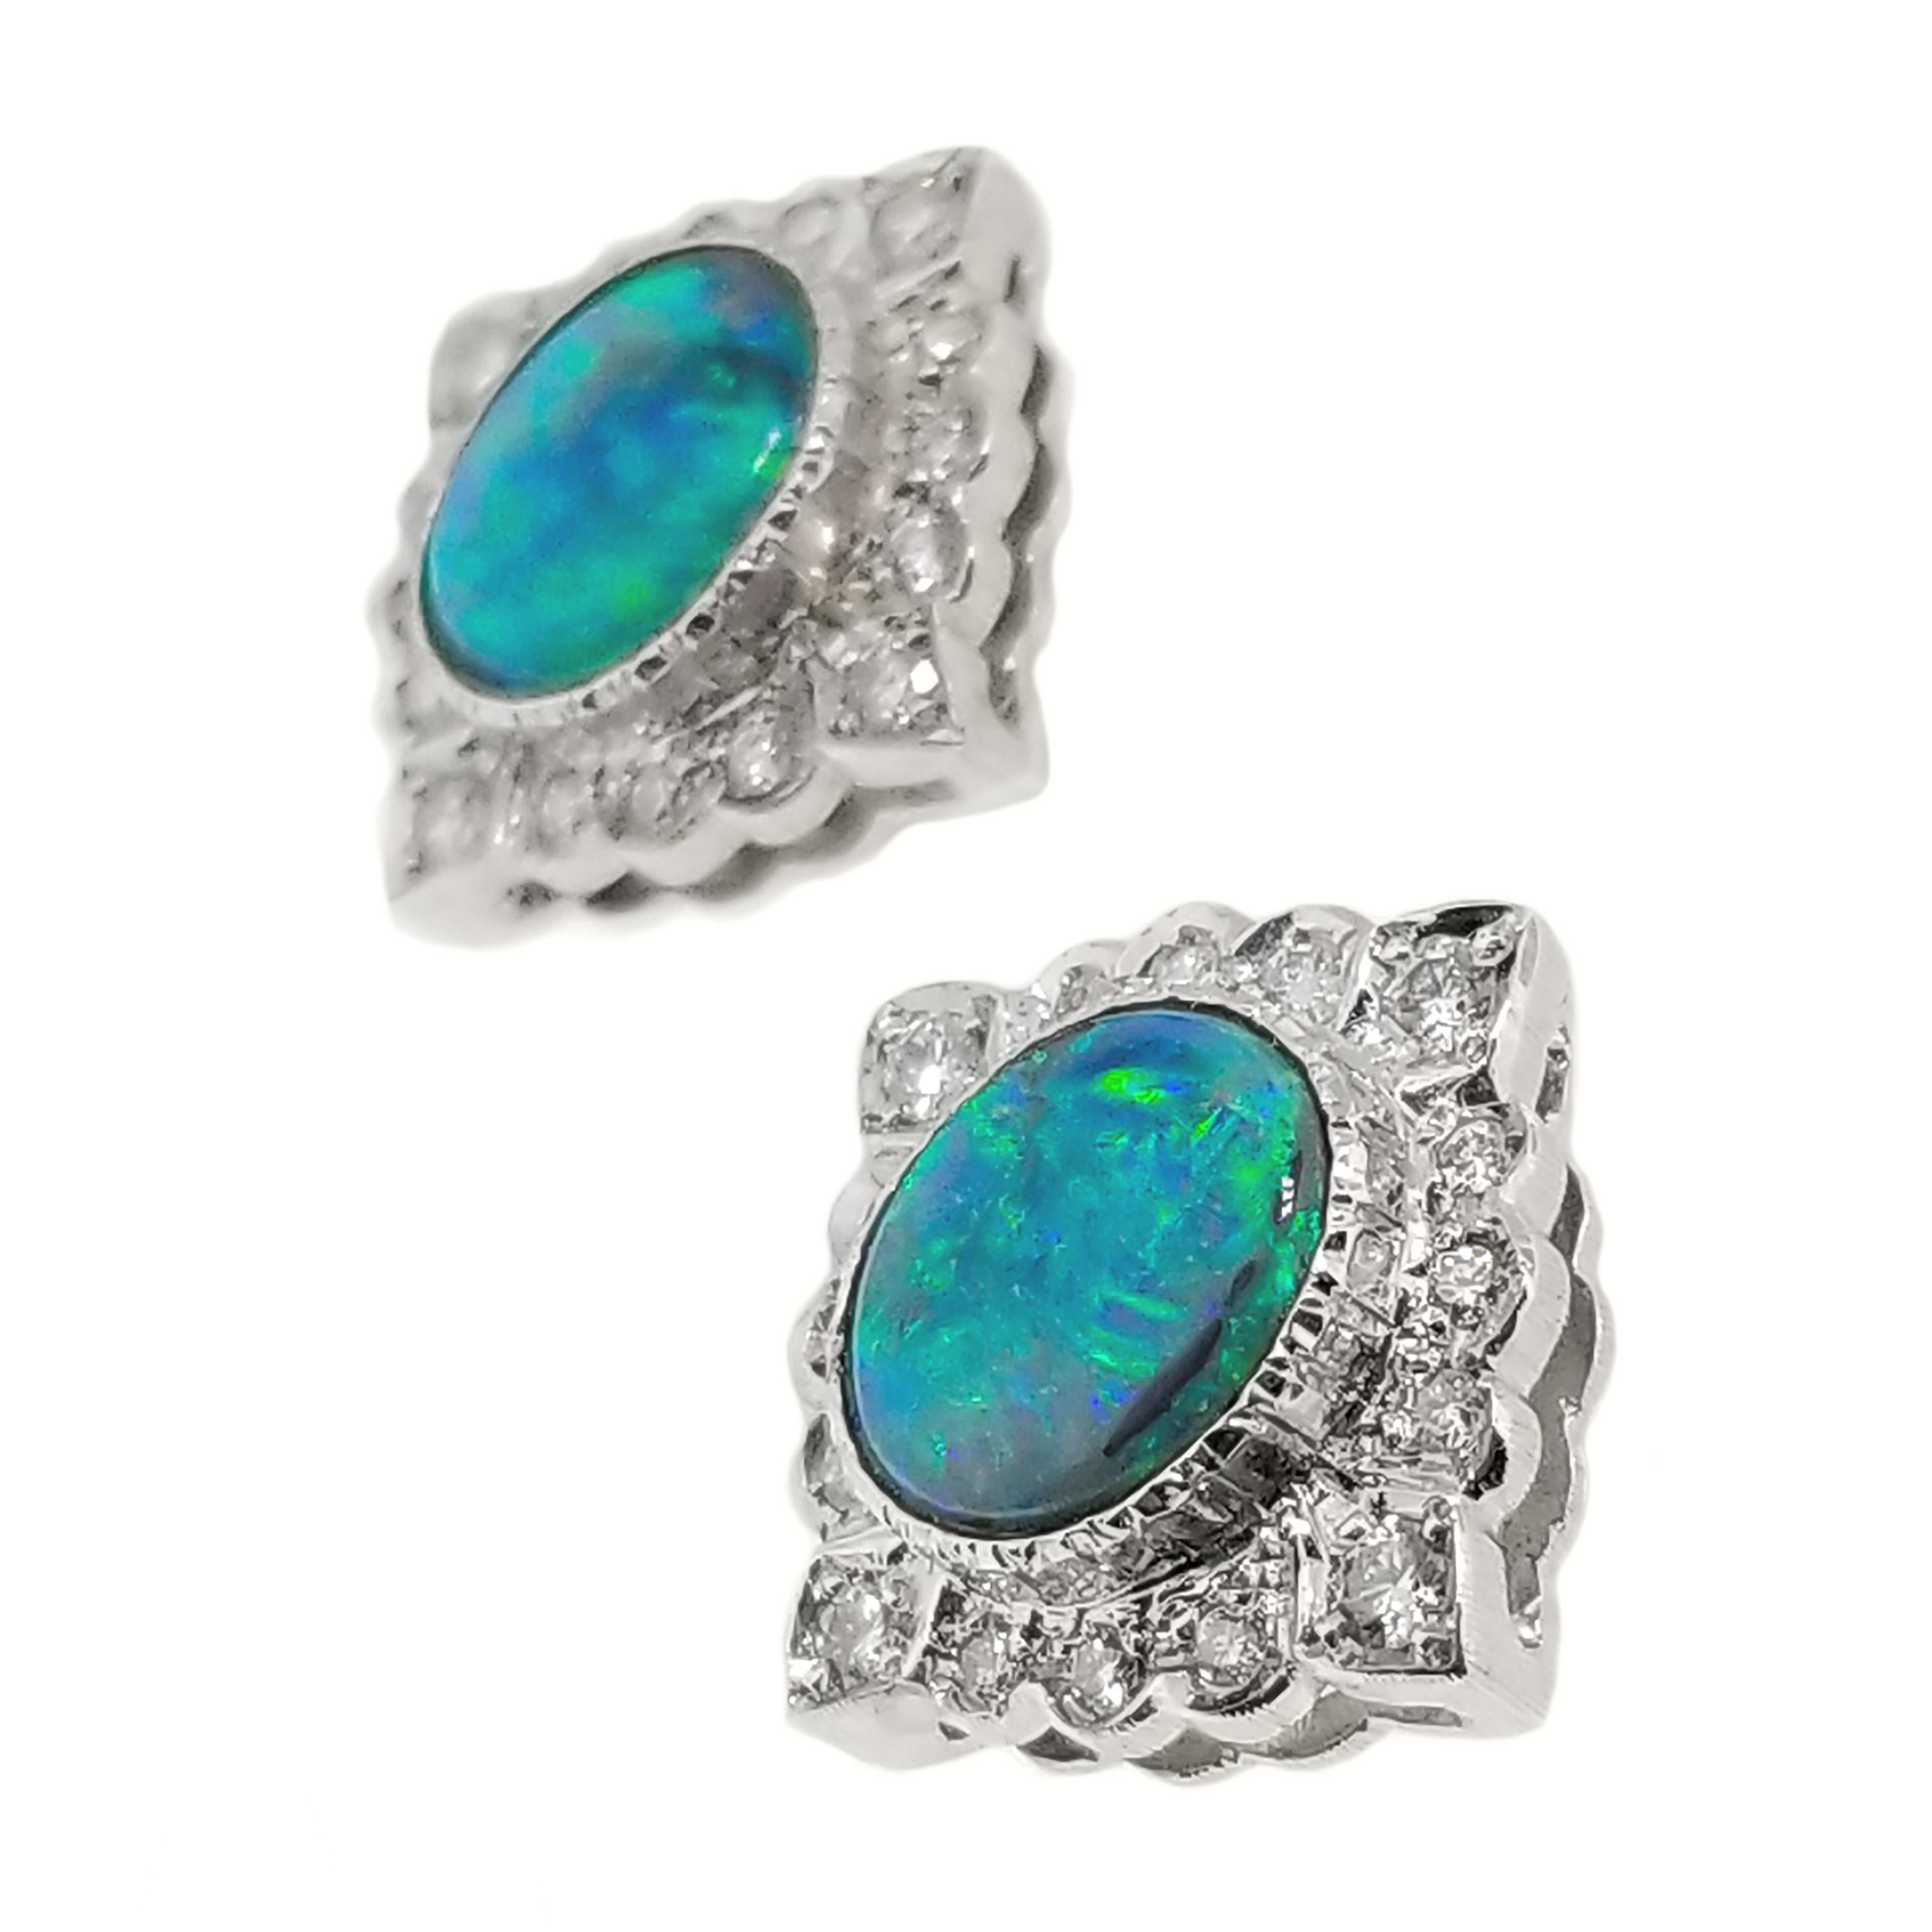 3.64ct Australian Black Opal, Diamond, and 18kt Alessia Earrings, Made in Italy 1